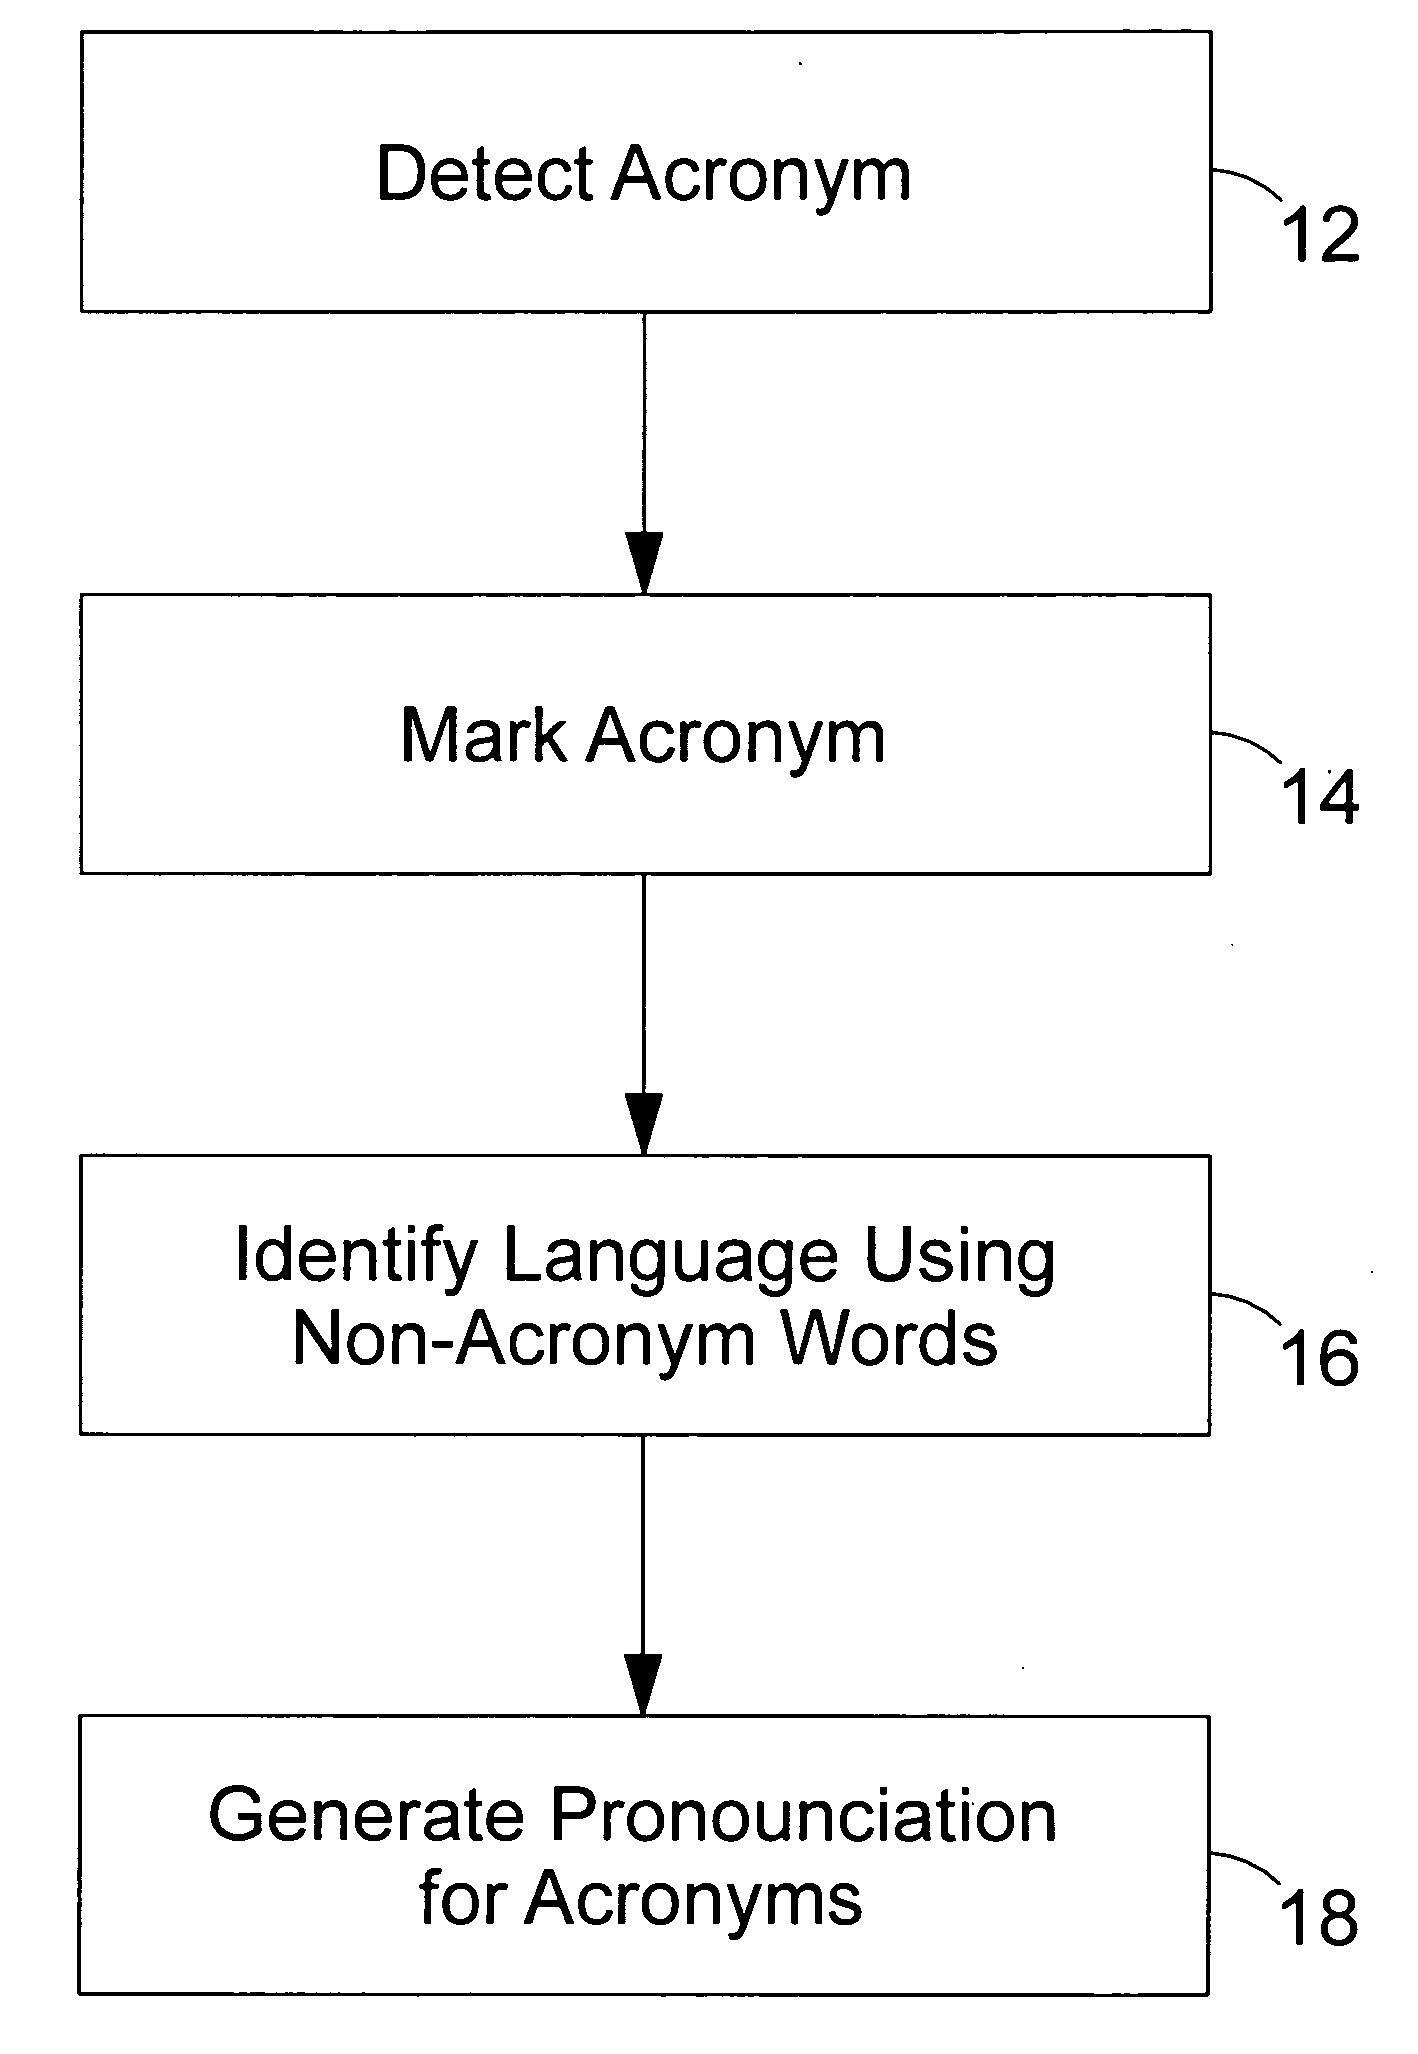 Handling of acronyms and digits in a speech recognition and text-to-speech engine